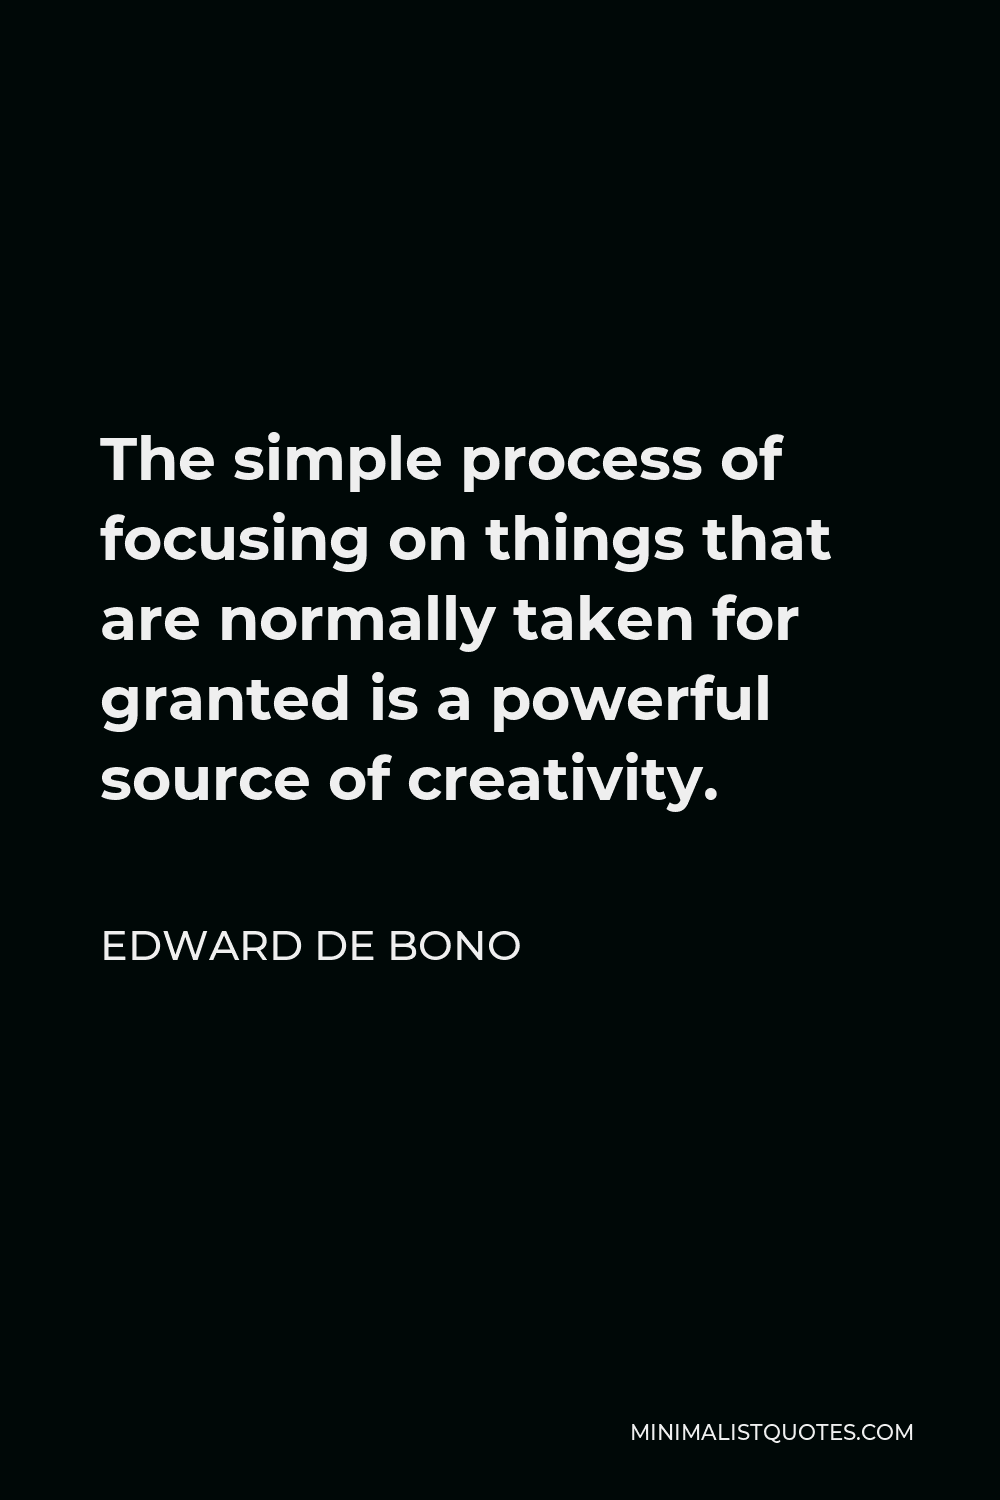 Edward de Bono Quote - The simple process of focusing on things that are normally taken for granted is a powerful source of creativity.